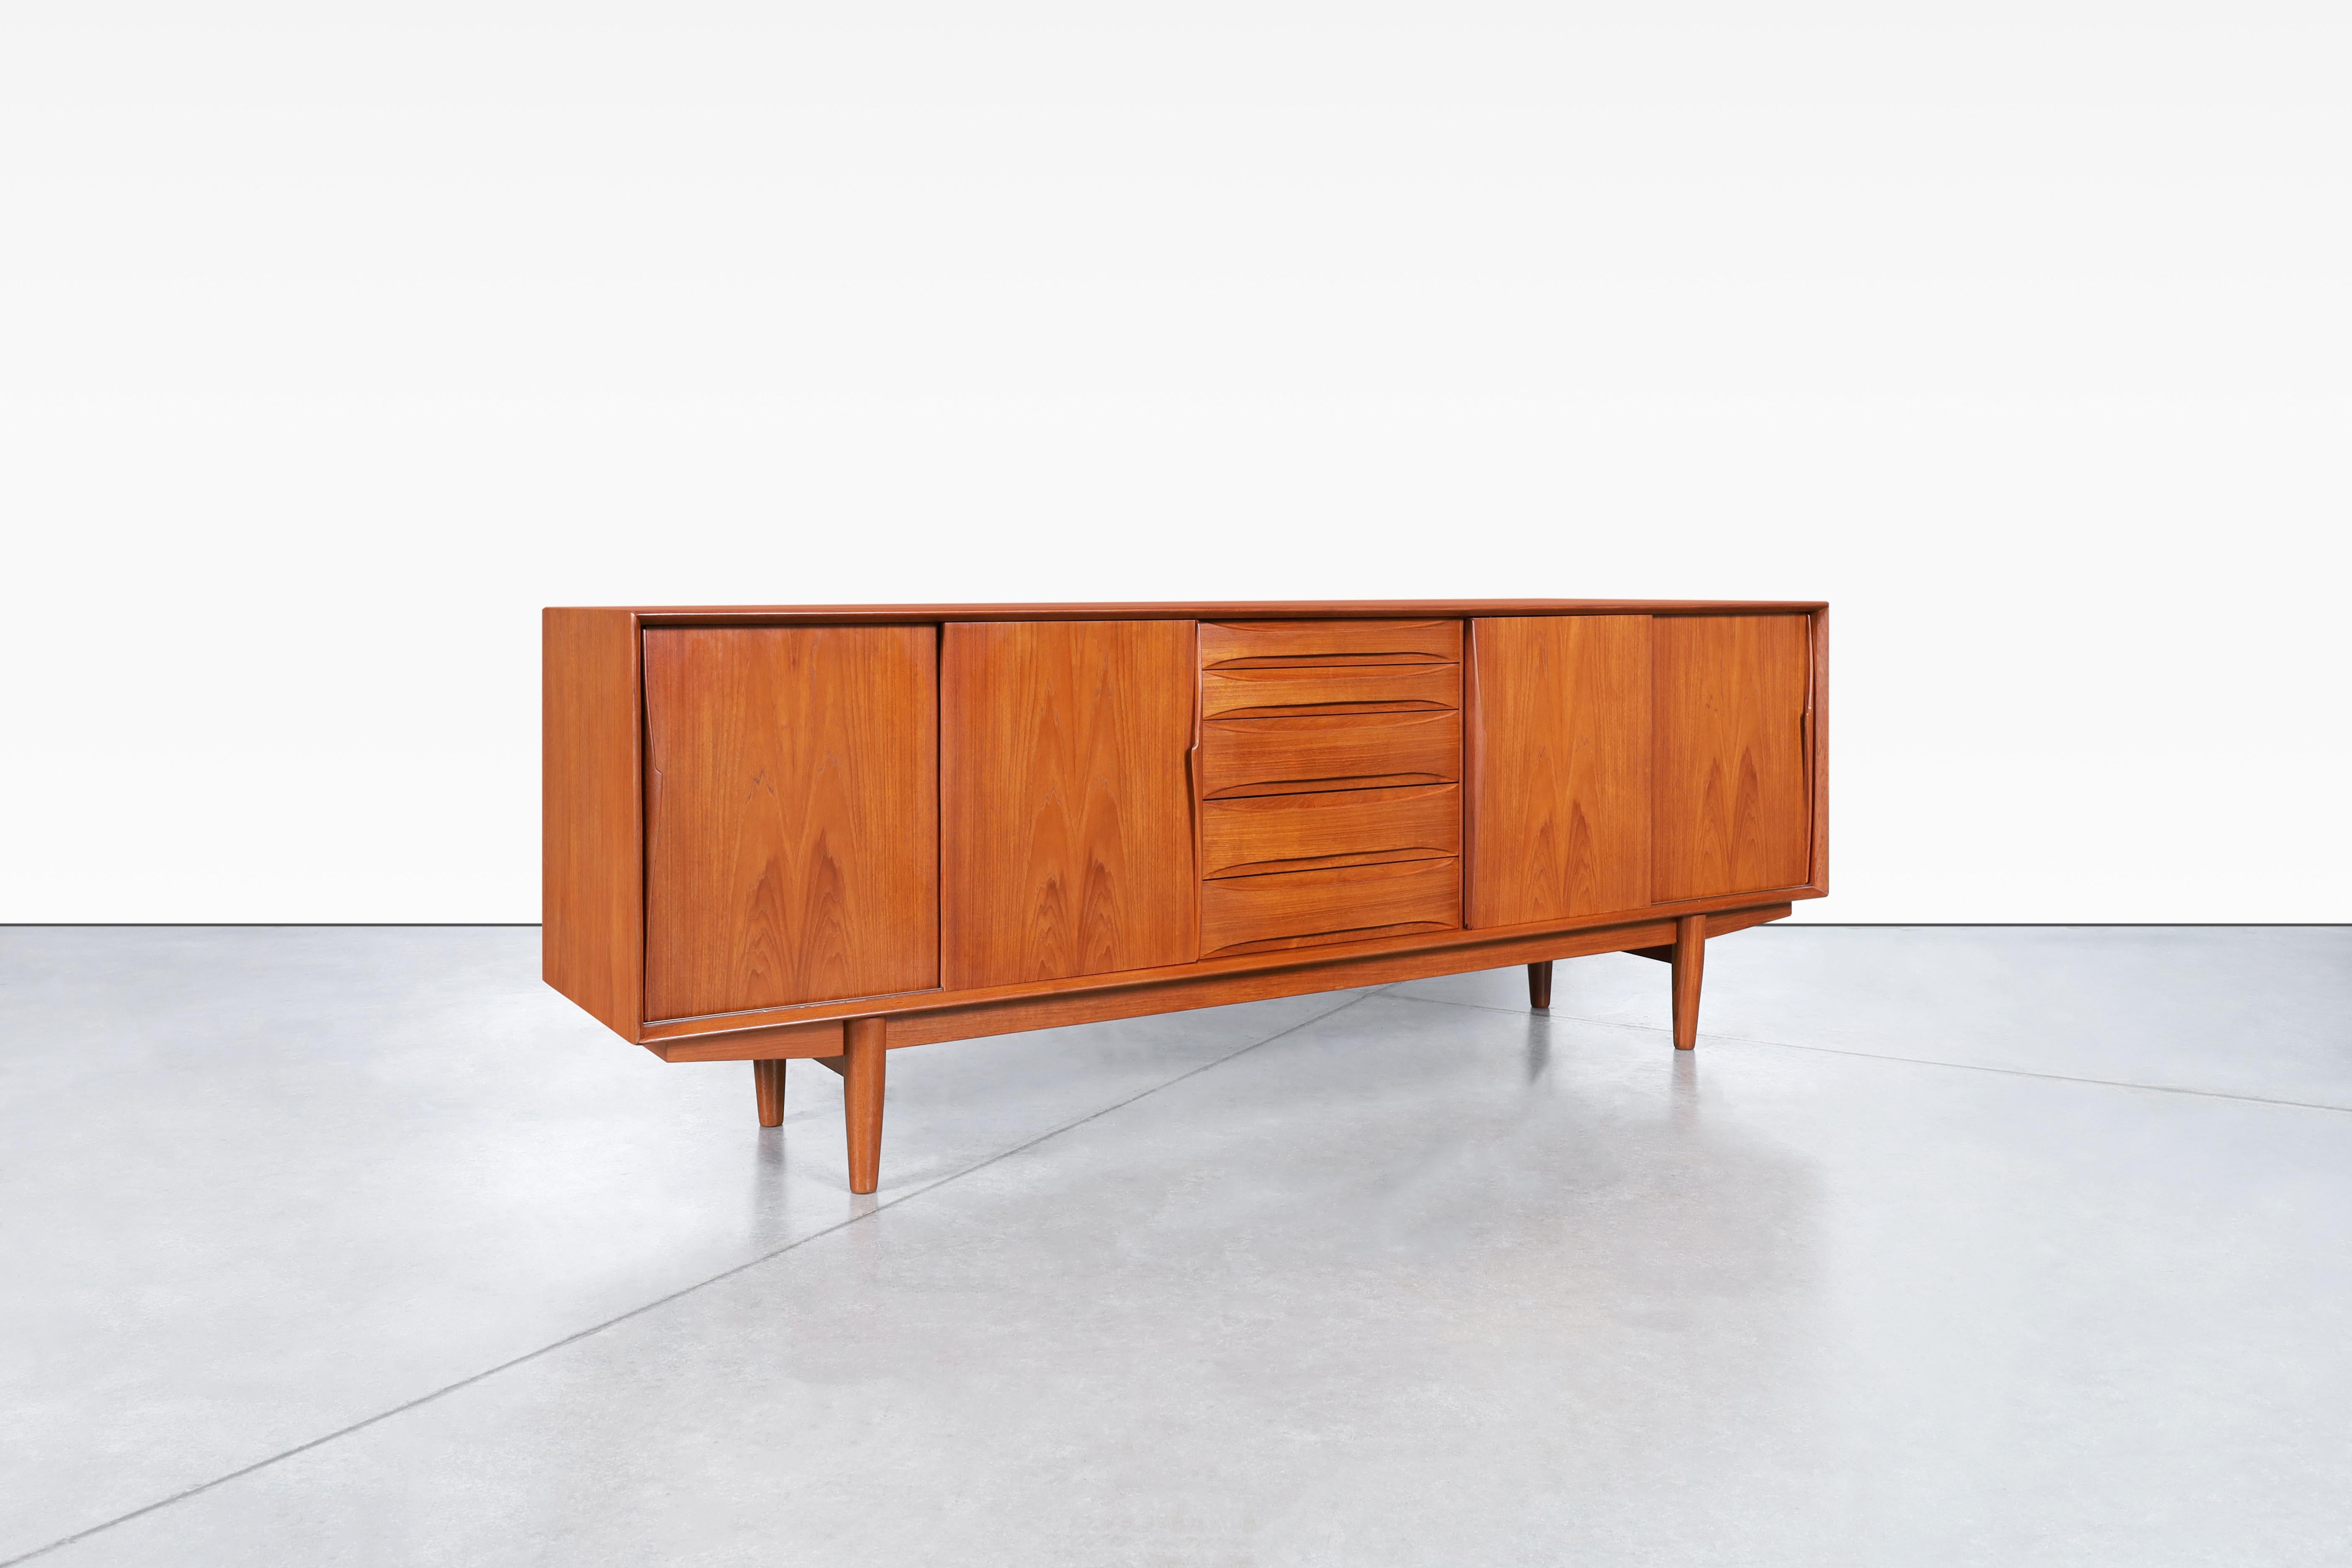 Stunning Danish modern teak credenza model 7738, attributed to Arne Vodder and produced Skovby Møbelfabrik in Denmark, circa 1960s. This skillfully crafted credenza, also known as model #7738, features four sliding doors with adjustable shelves and